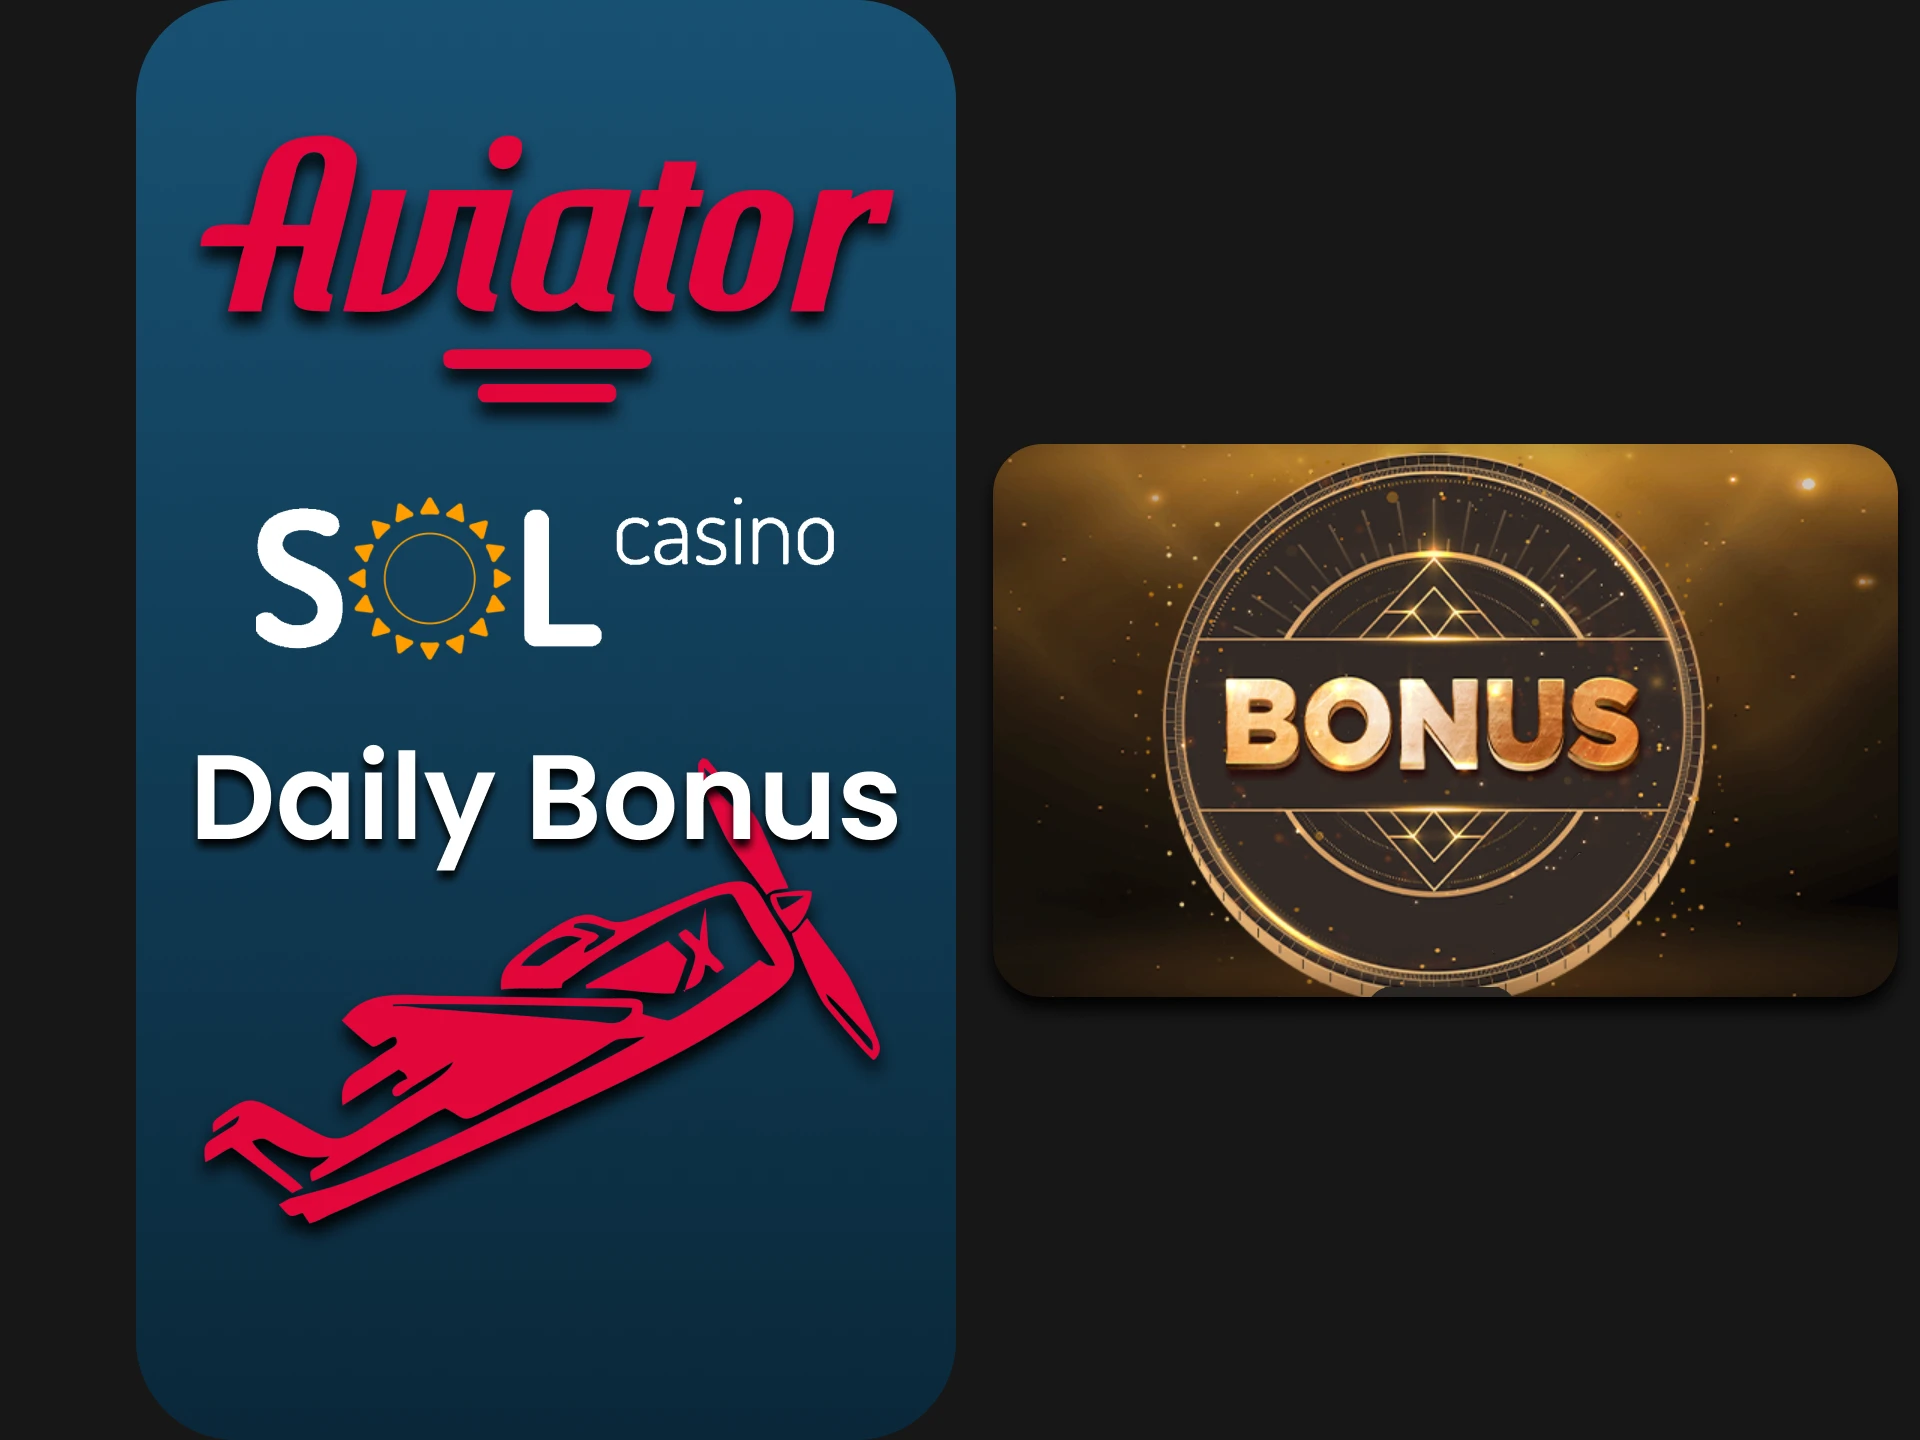 Sol Casino gives a daily bonus for the Aviator.